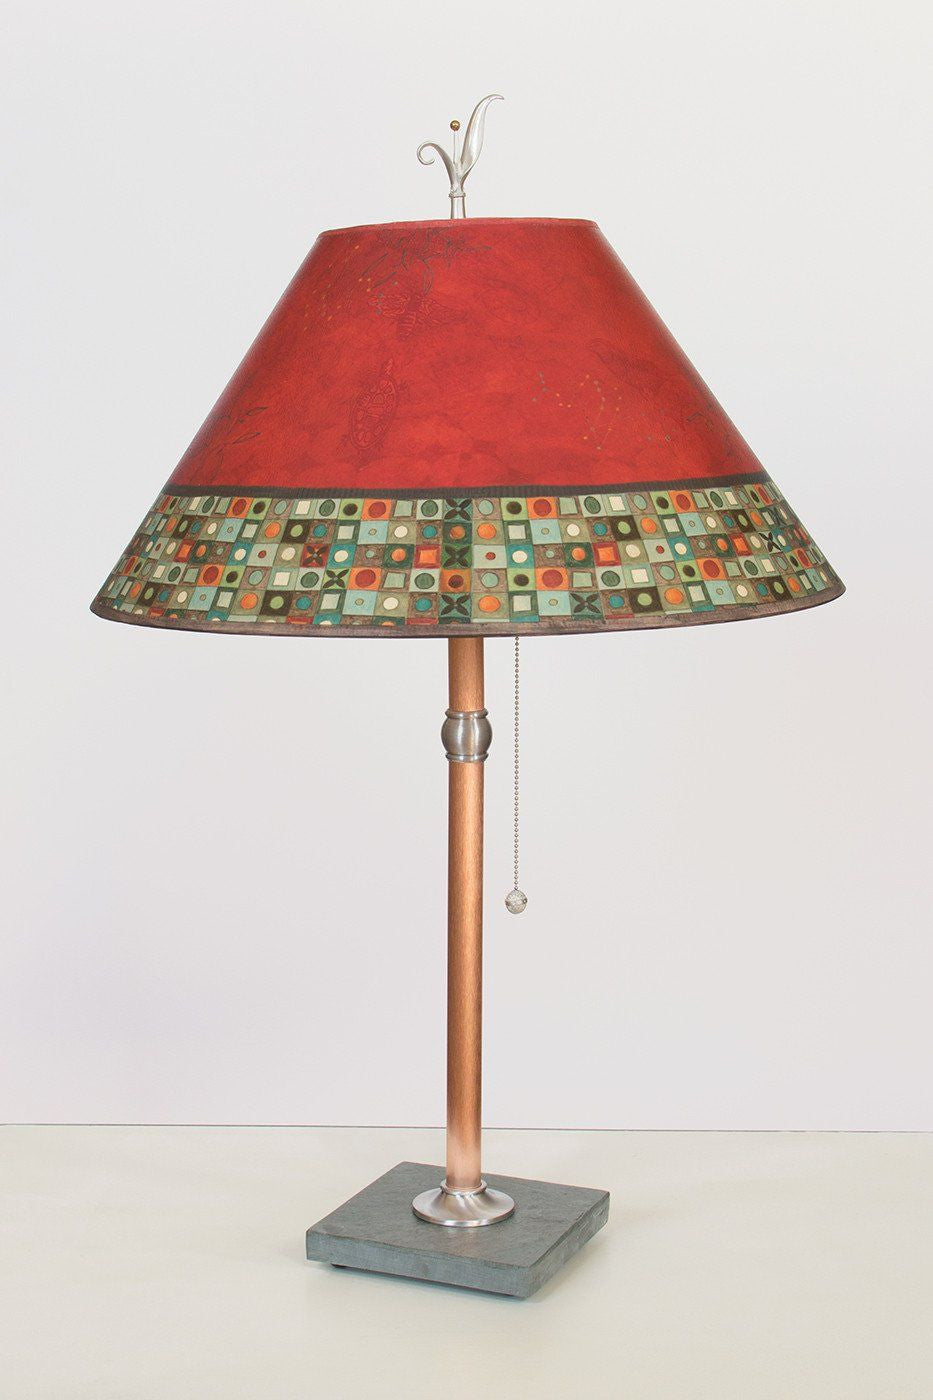 Janna Ugone & Co Table Lamps Copper Table Lamp with Large Conical Shade in Red Mosaic